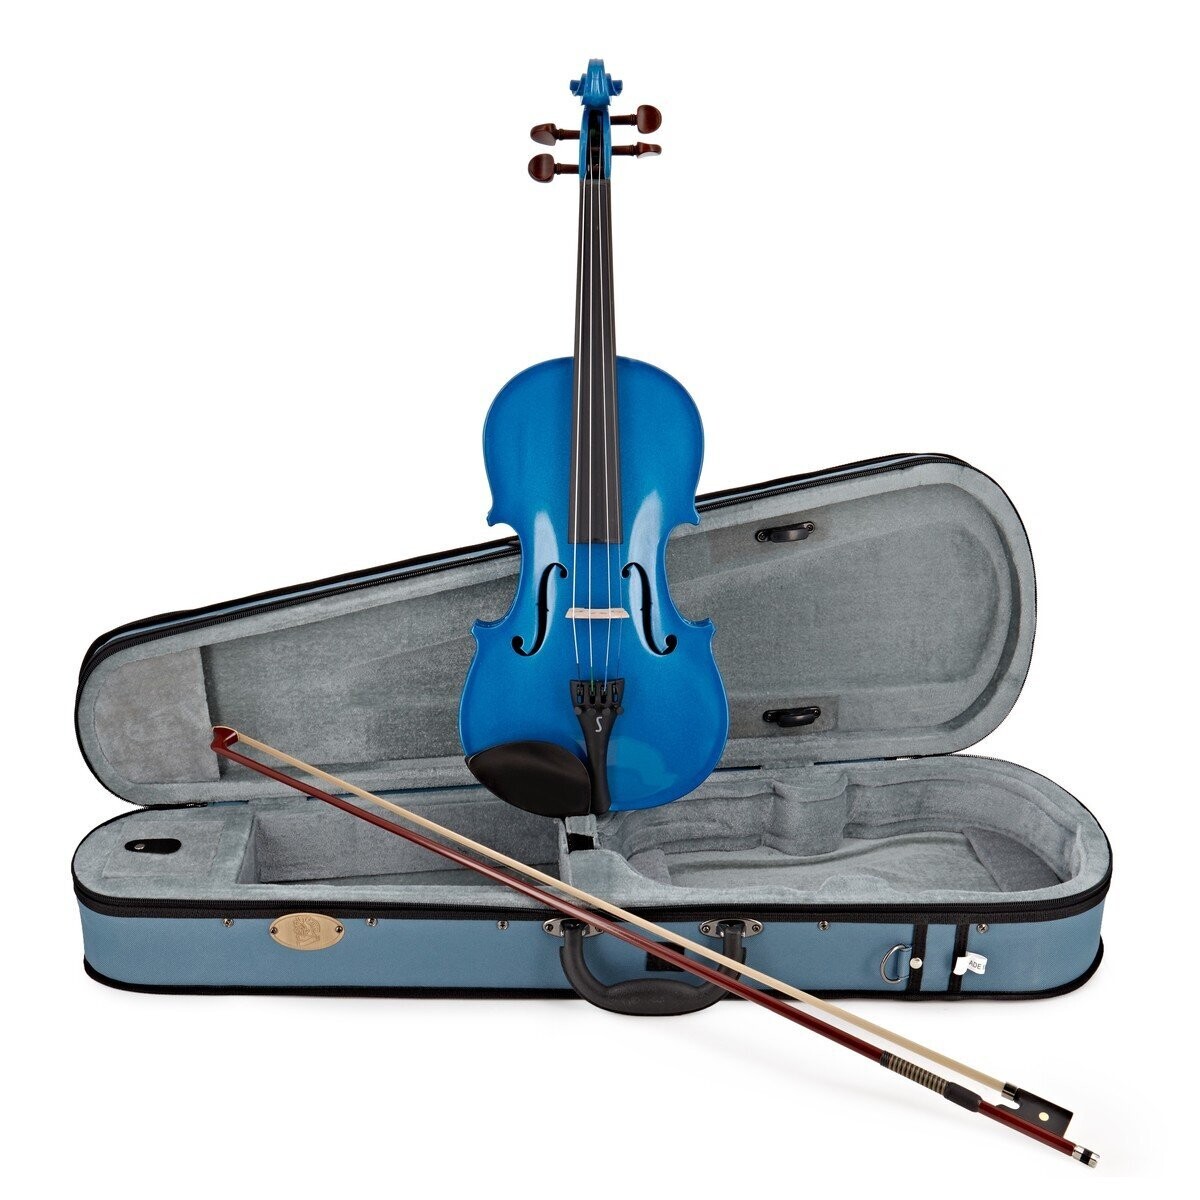 Harlequin Violin Outfit Blue 4/4 Size with Lightweight Case P&H fibreglass bow